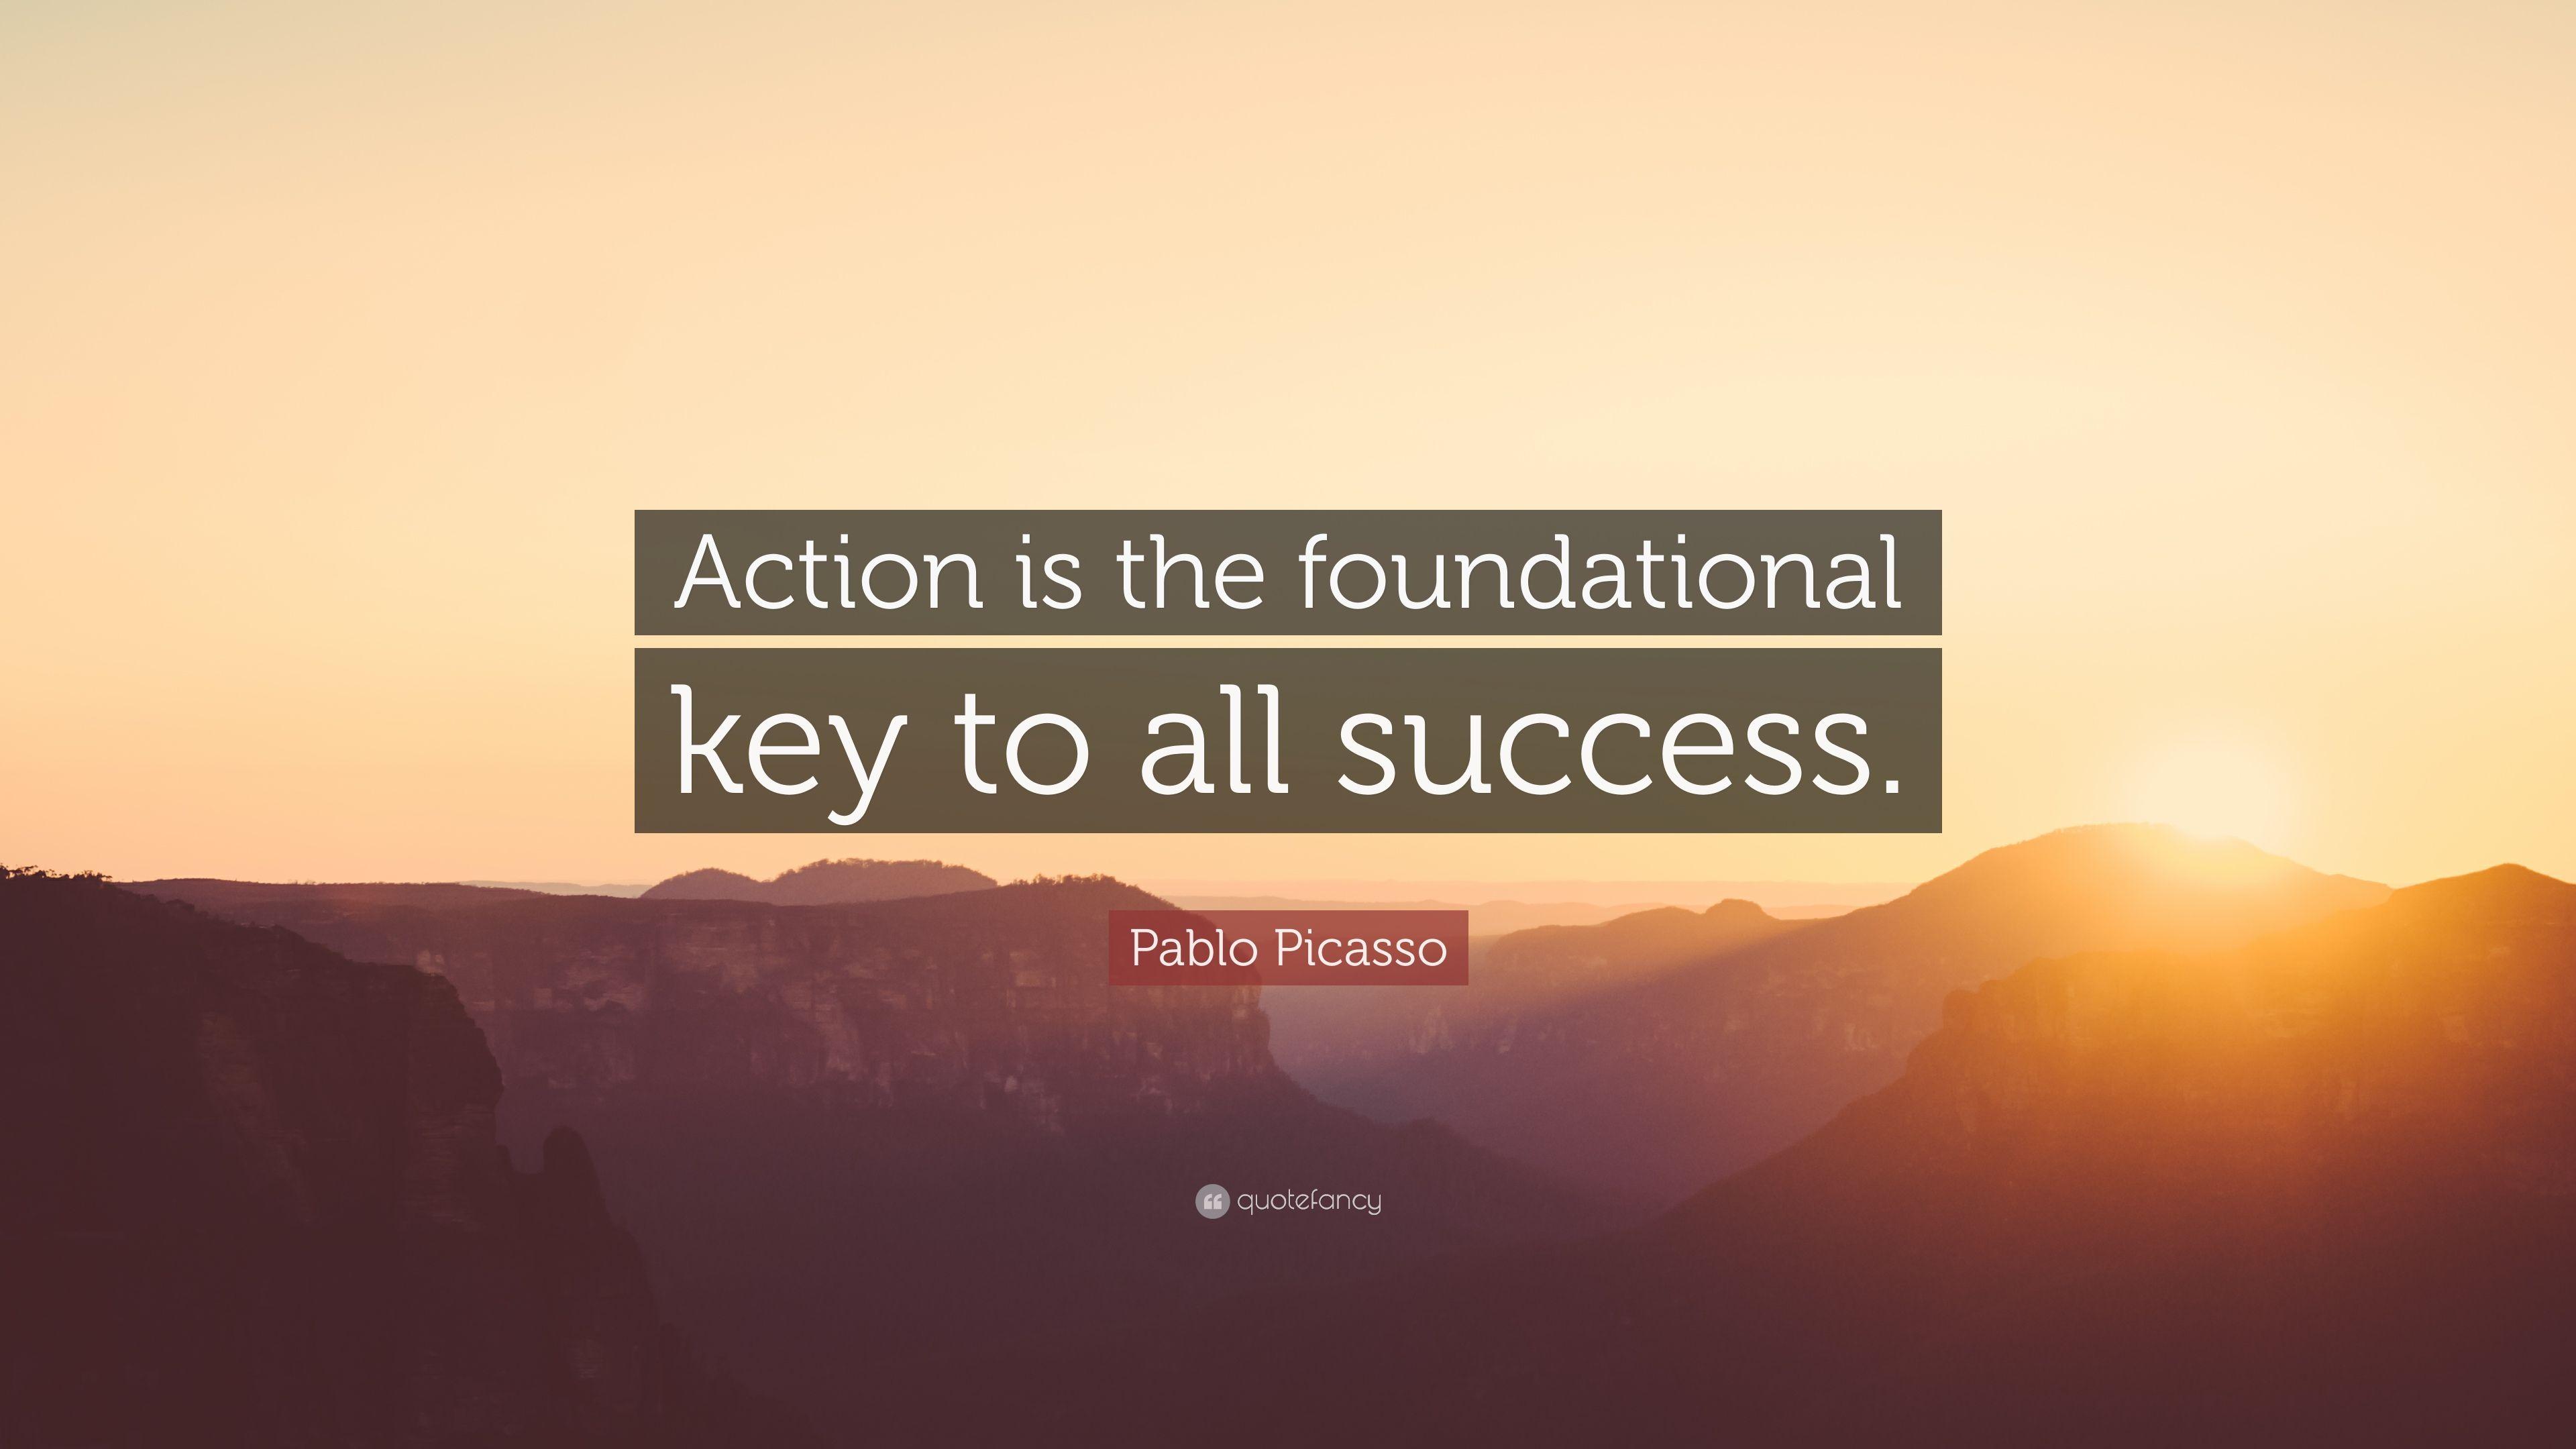 Pablo Picasso Quote: “Action is the foundational key to all success